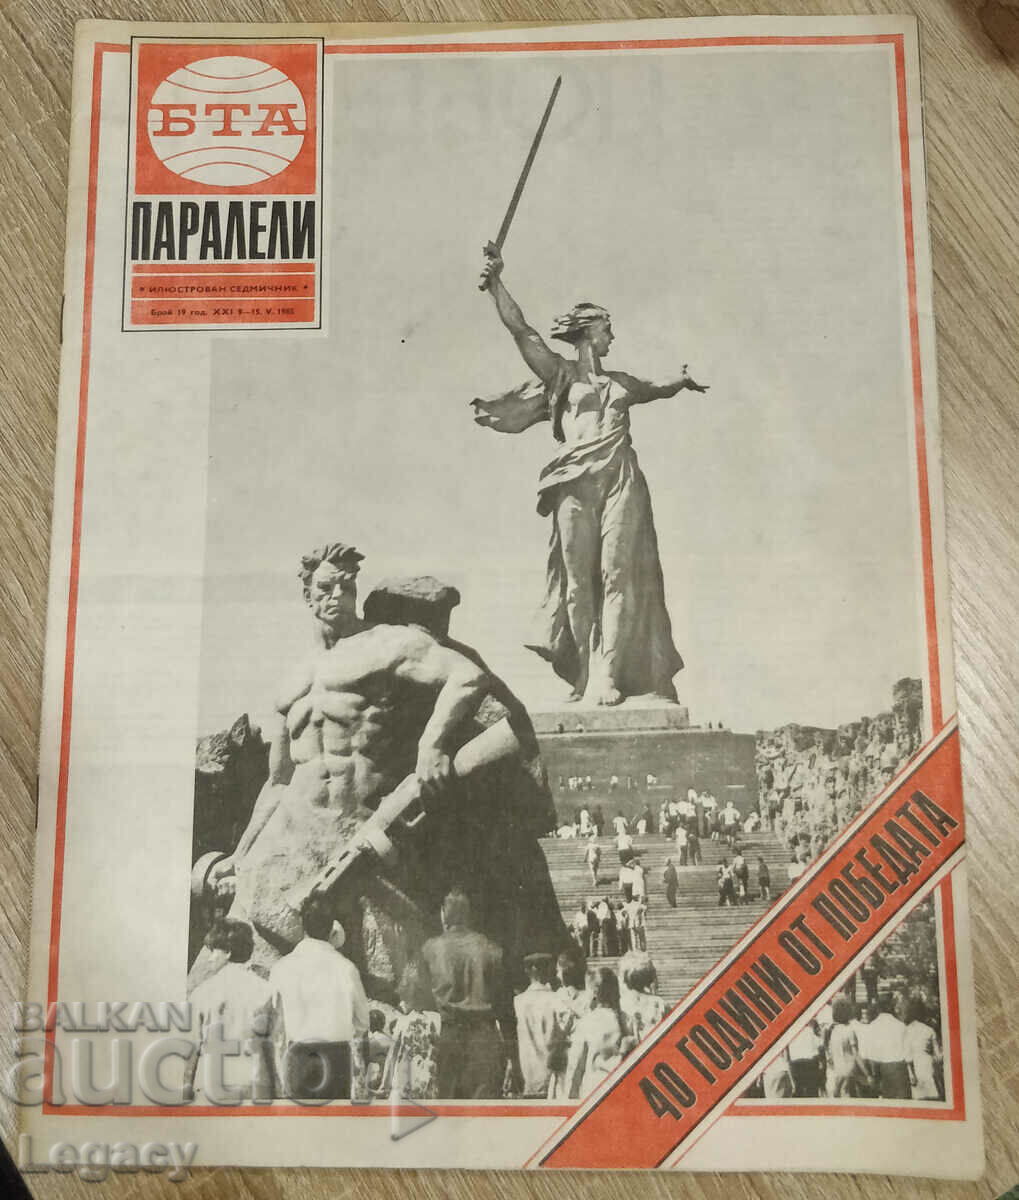 1985 Magazine BTA Parallels - 40 years since the victory, issue 19